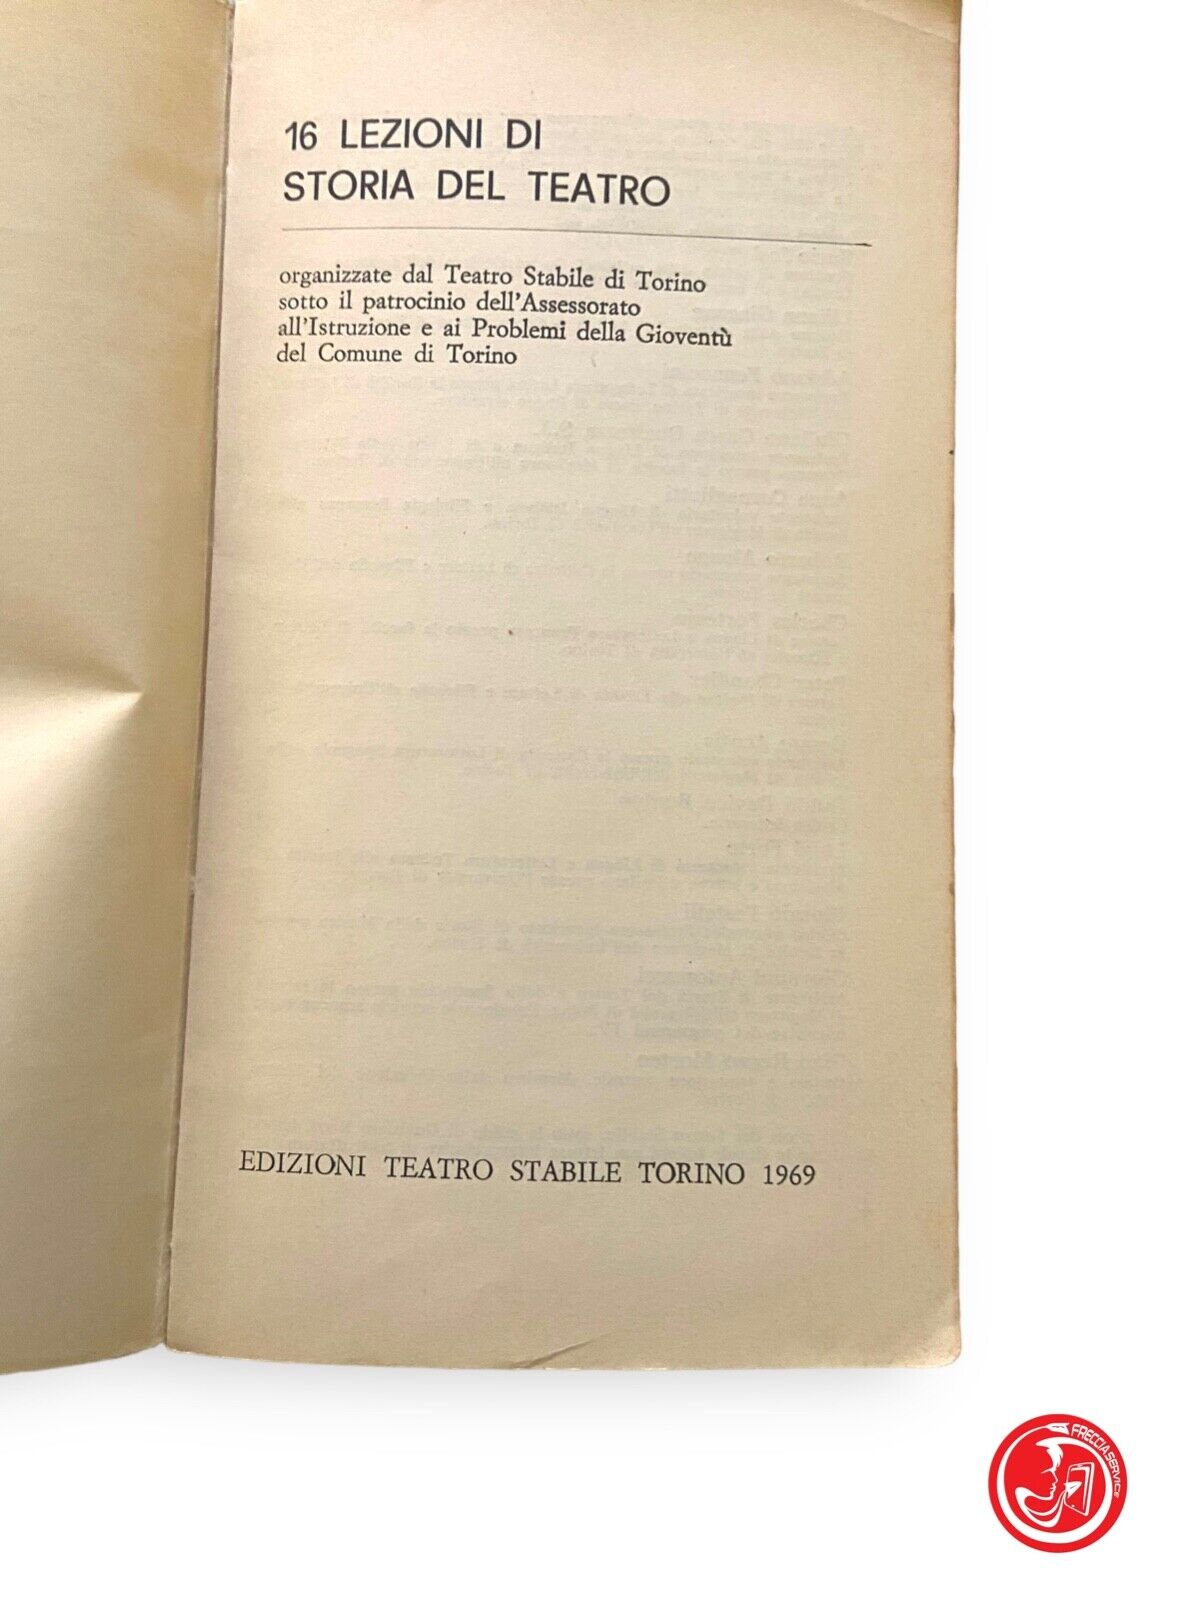 16 LESSONS ON THE HISTORY OF THEATER - EDITIONS TEATRO STABILE TORINO 1969